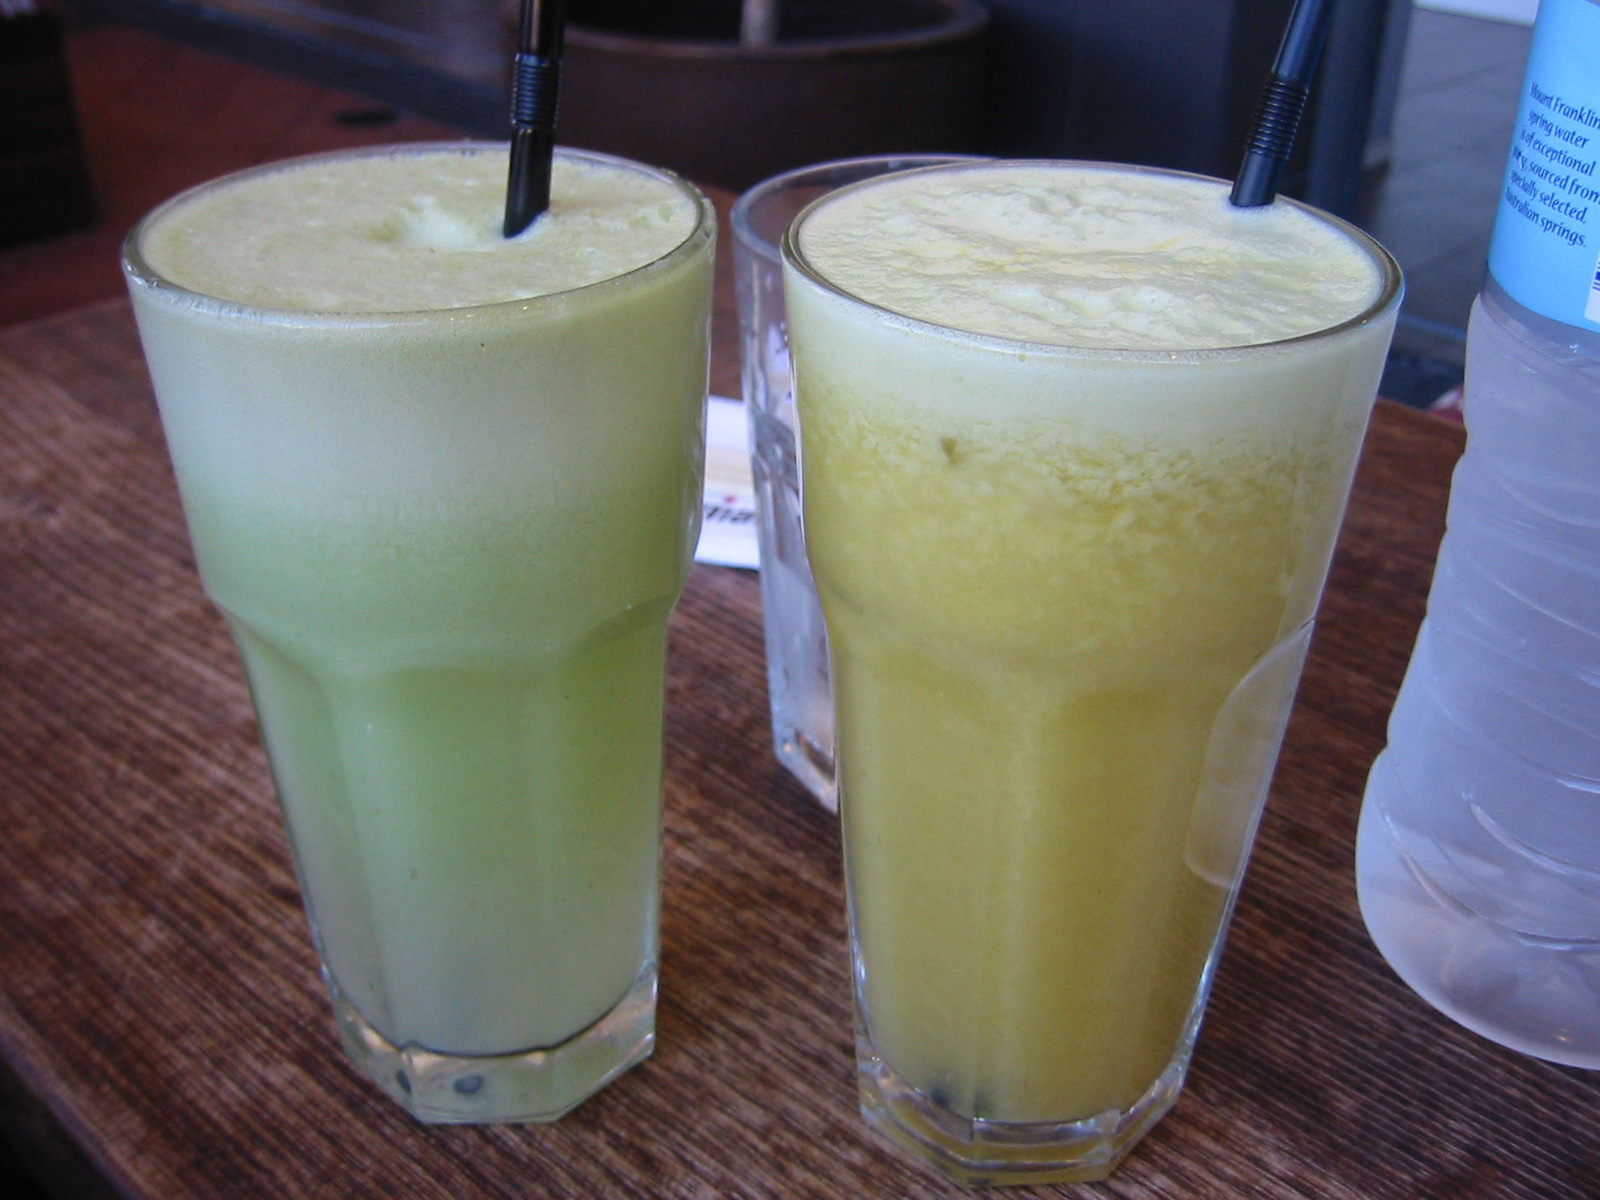 Two juices